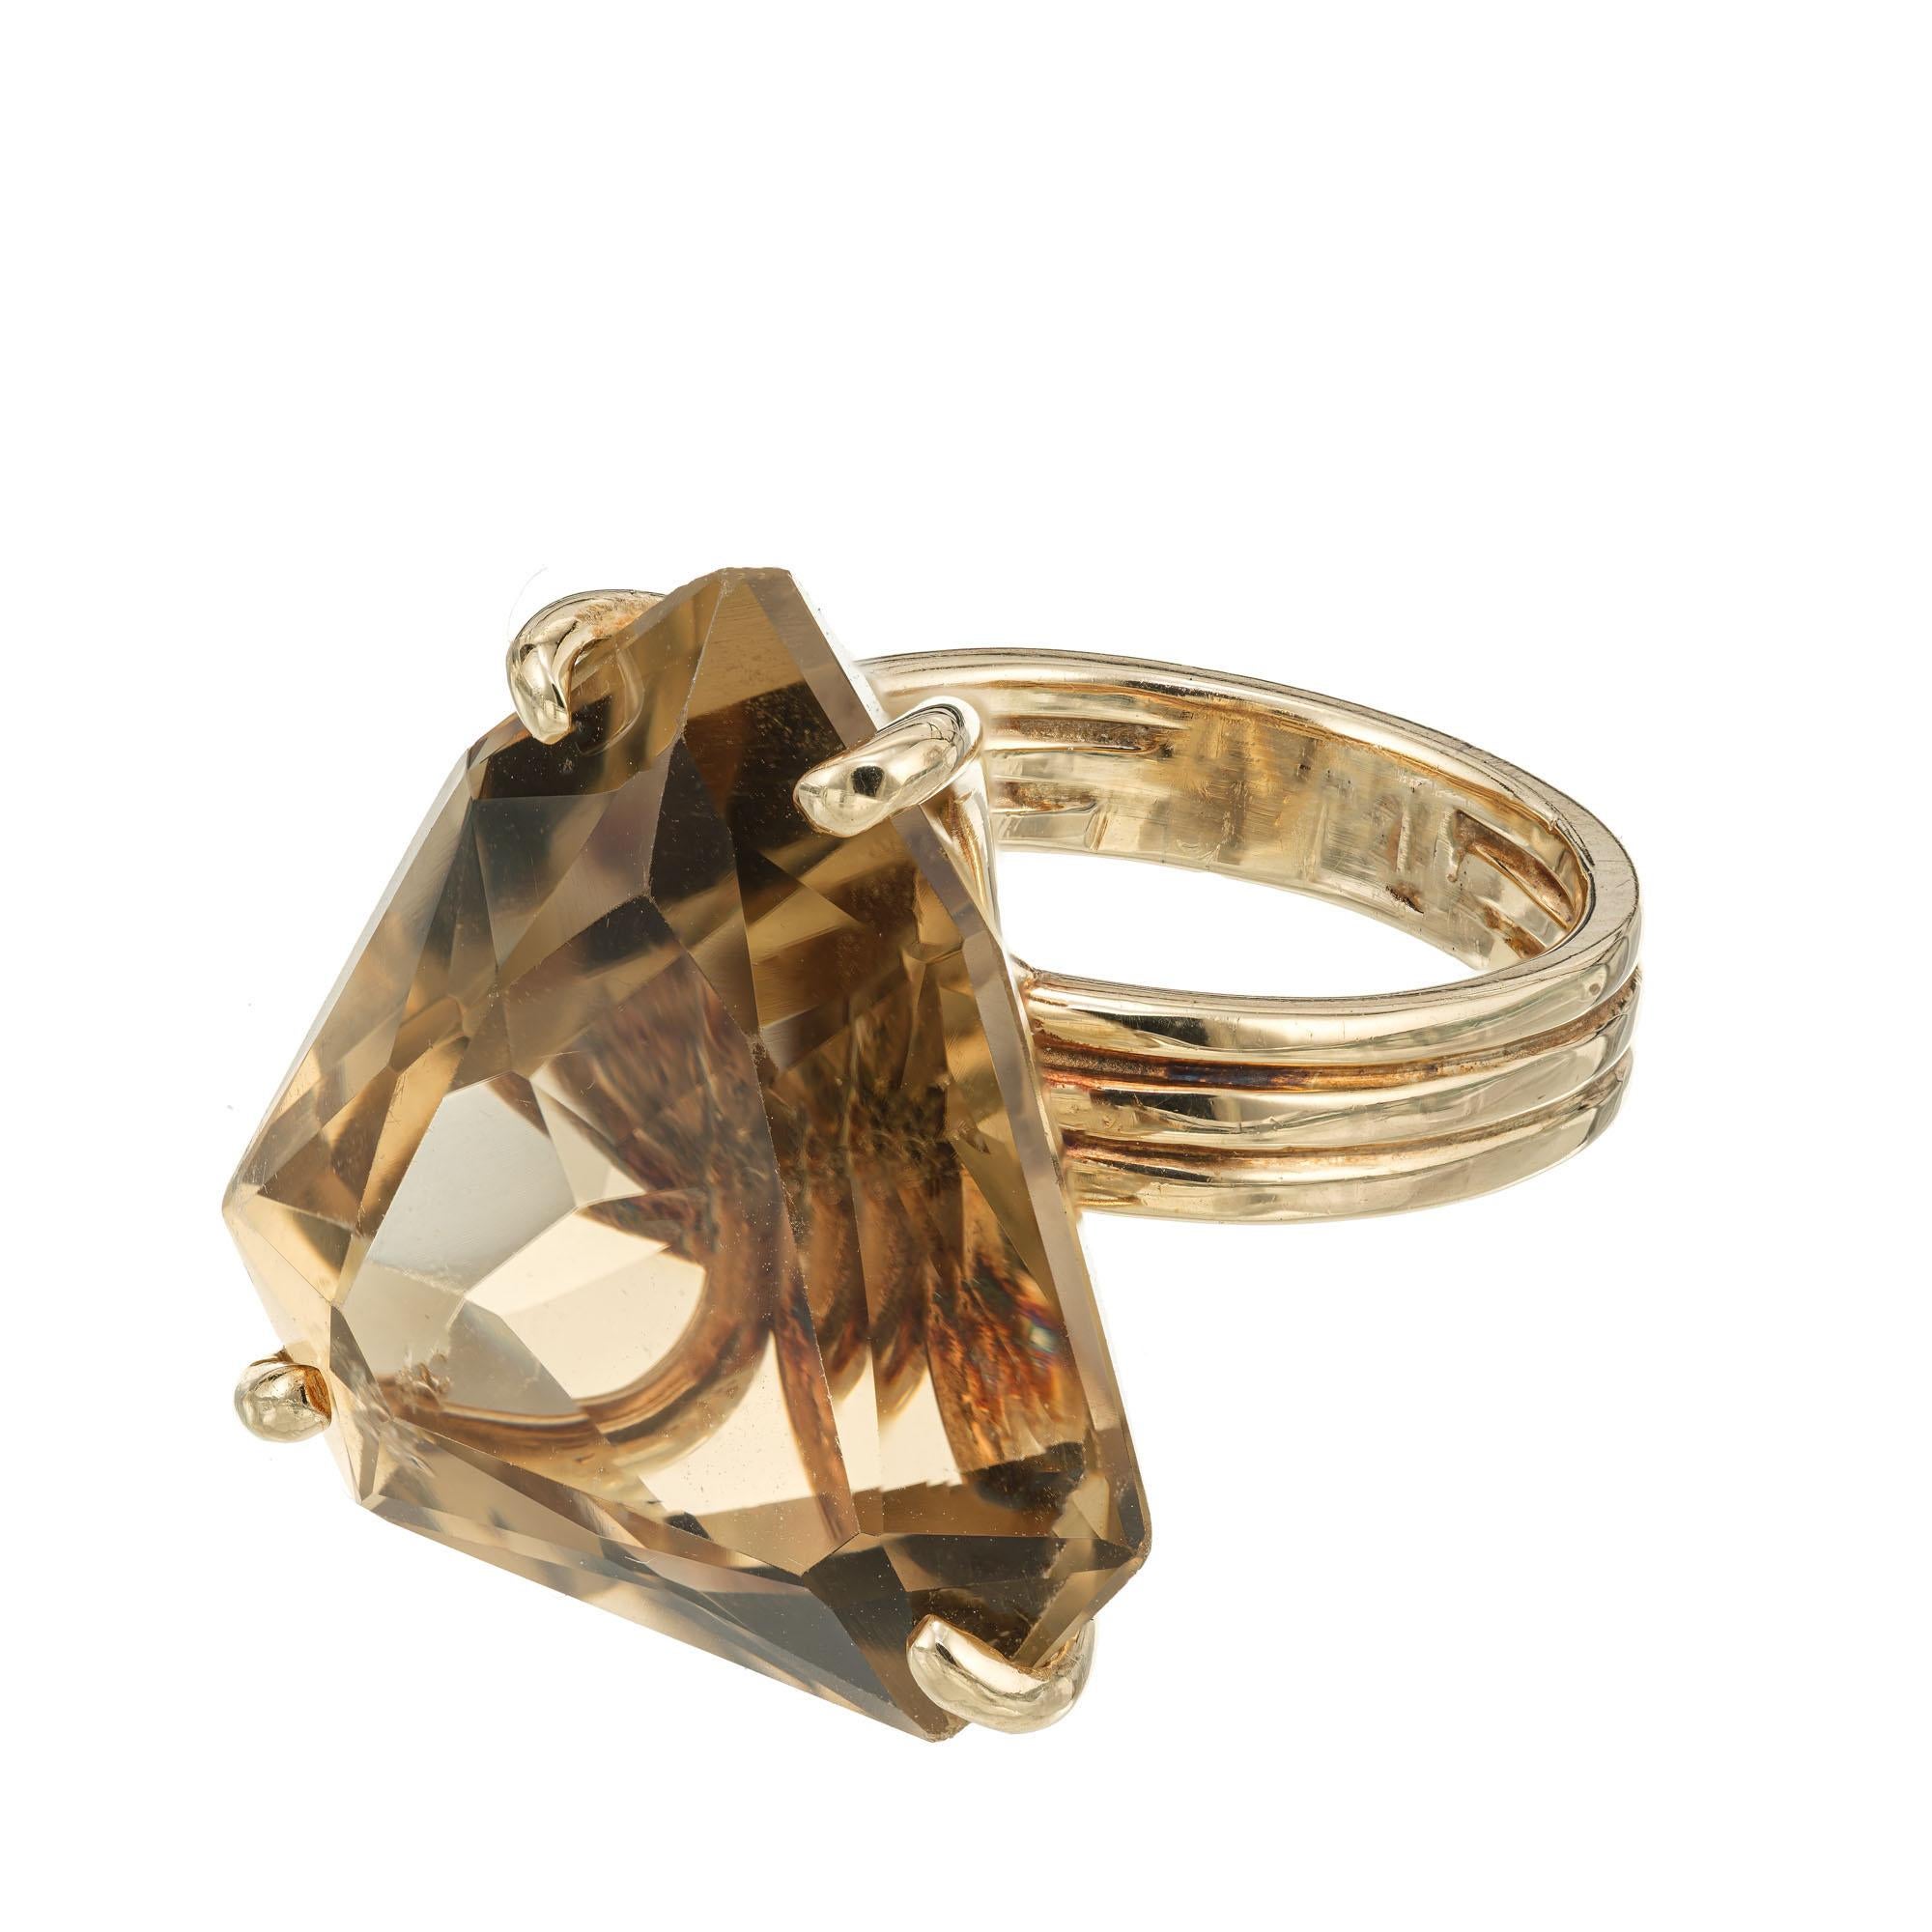 1950's shield shape Citrine Quartz ring. 22.00 center stone in a 14k yellow gold cocktail setting. 

1 Genuine shield shape Citrine 22.9 x 21.5 x 11mm, approx. total weight 22.00cts
Size 7 and sizable
14k Yellow Gold
Tested: 14k
10.8 grams
Width at